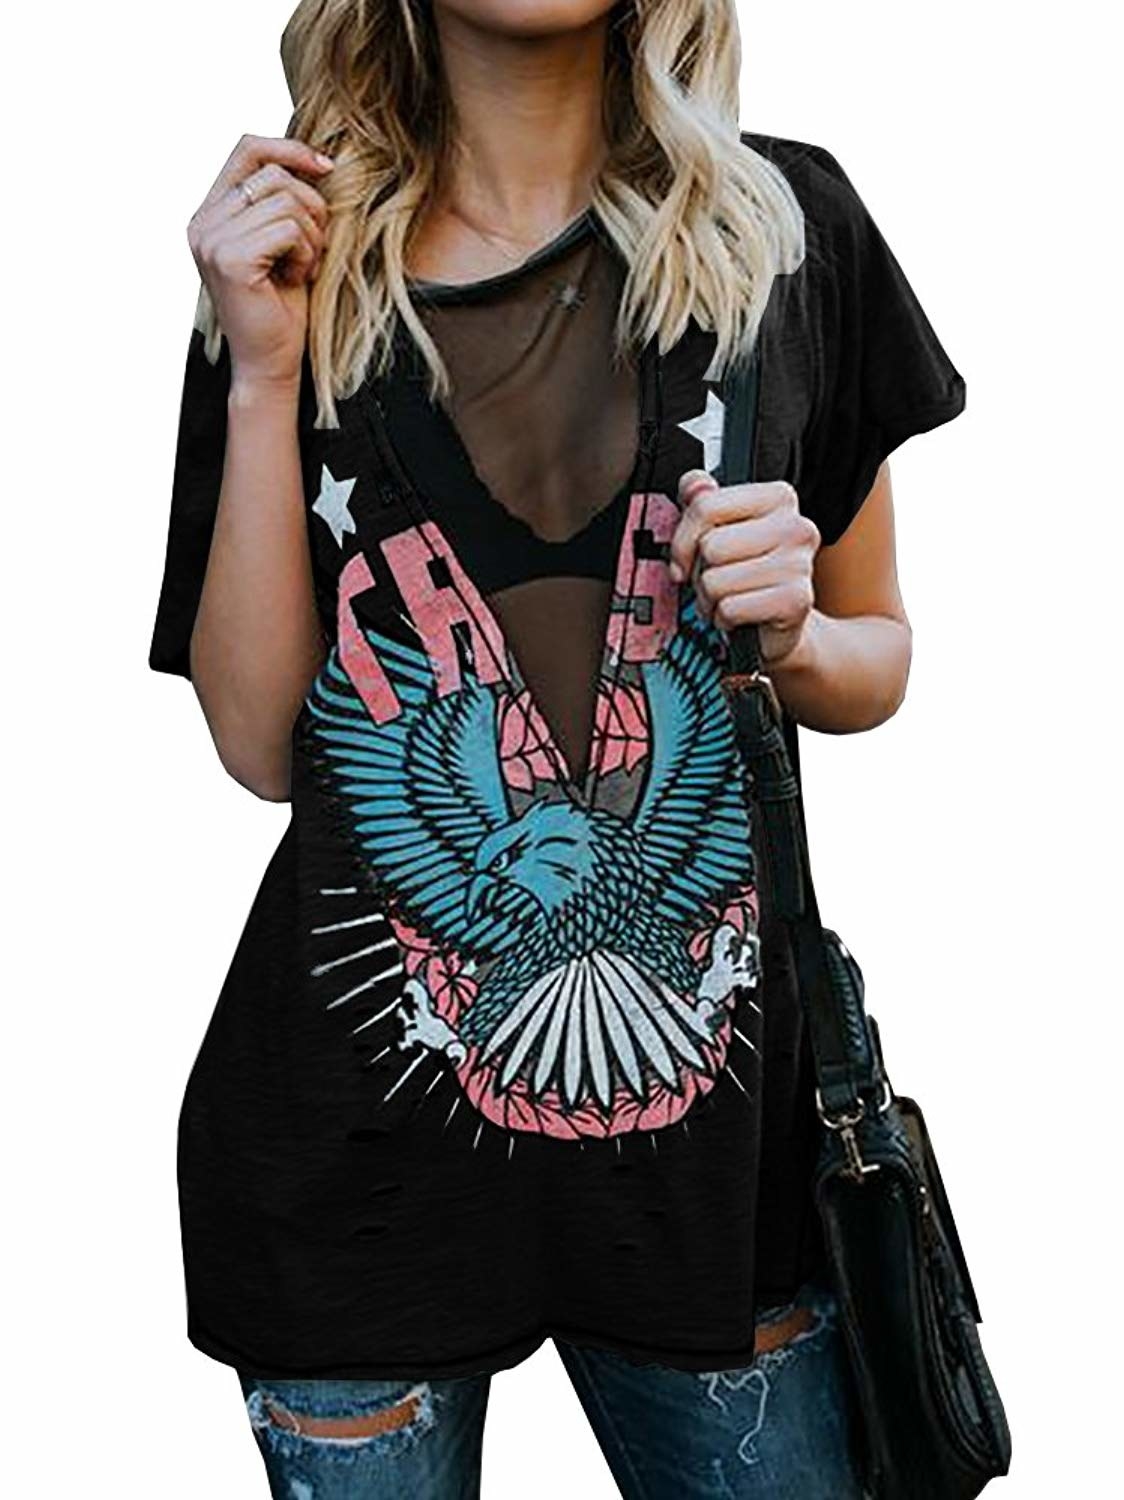 52 Graphic Tees You're Gonna Want To Buy Immediately